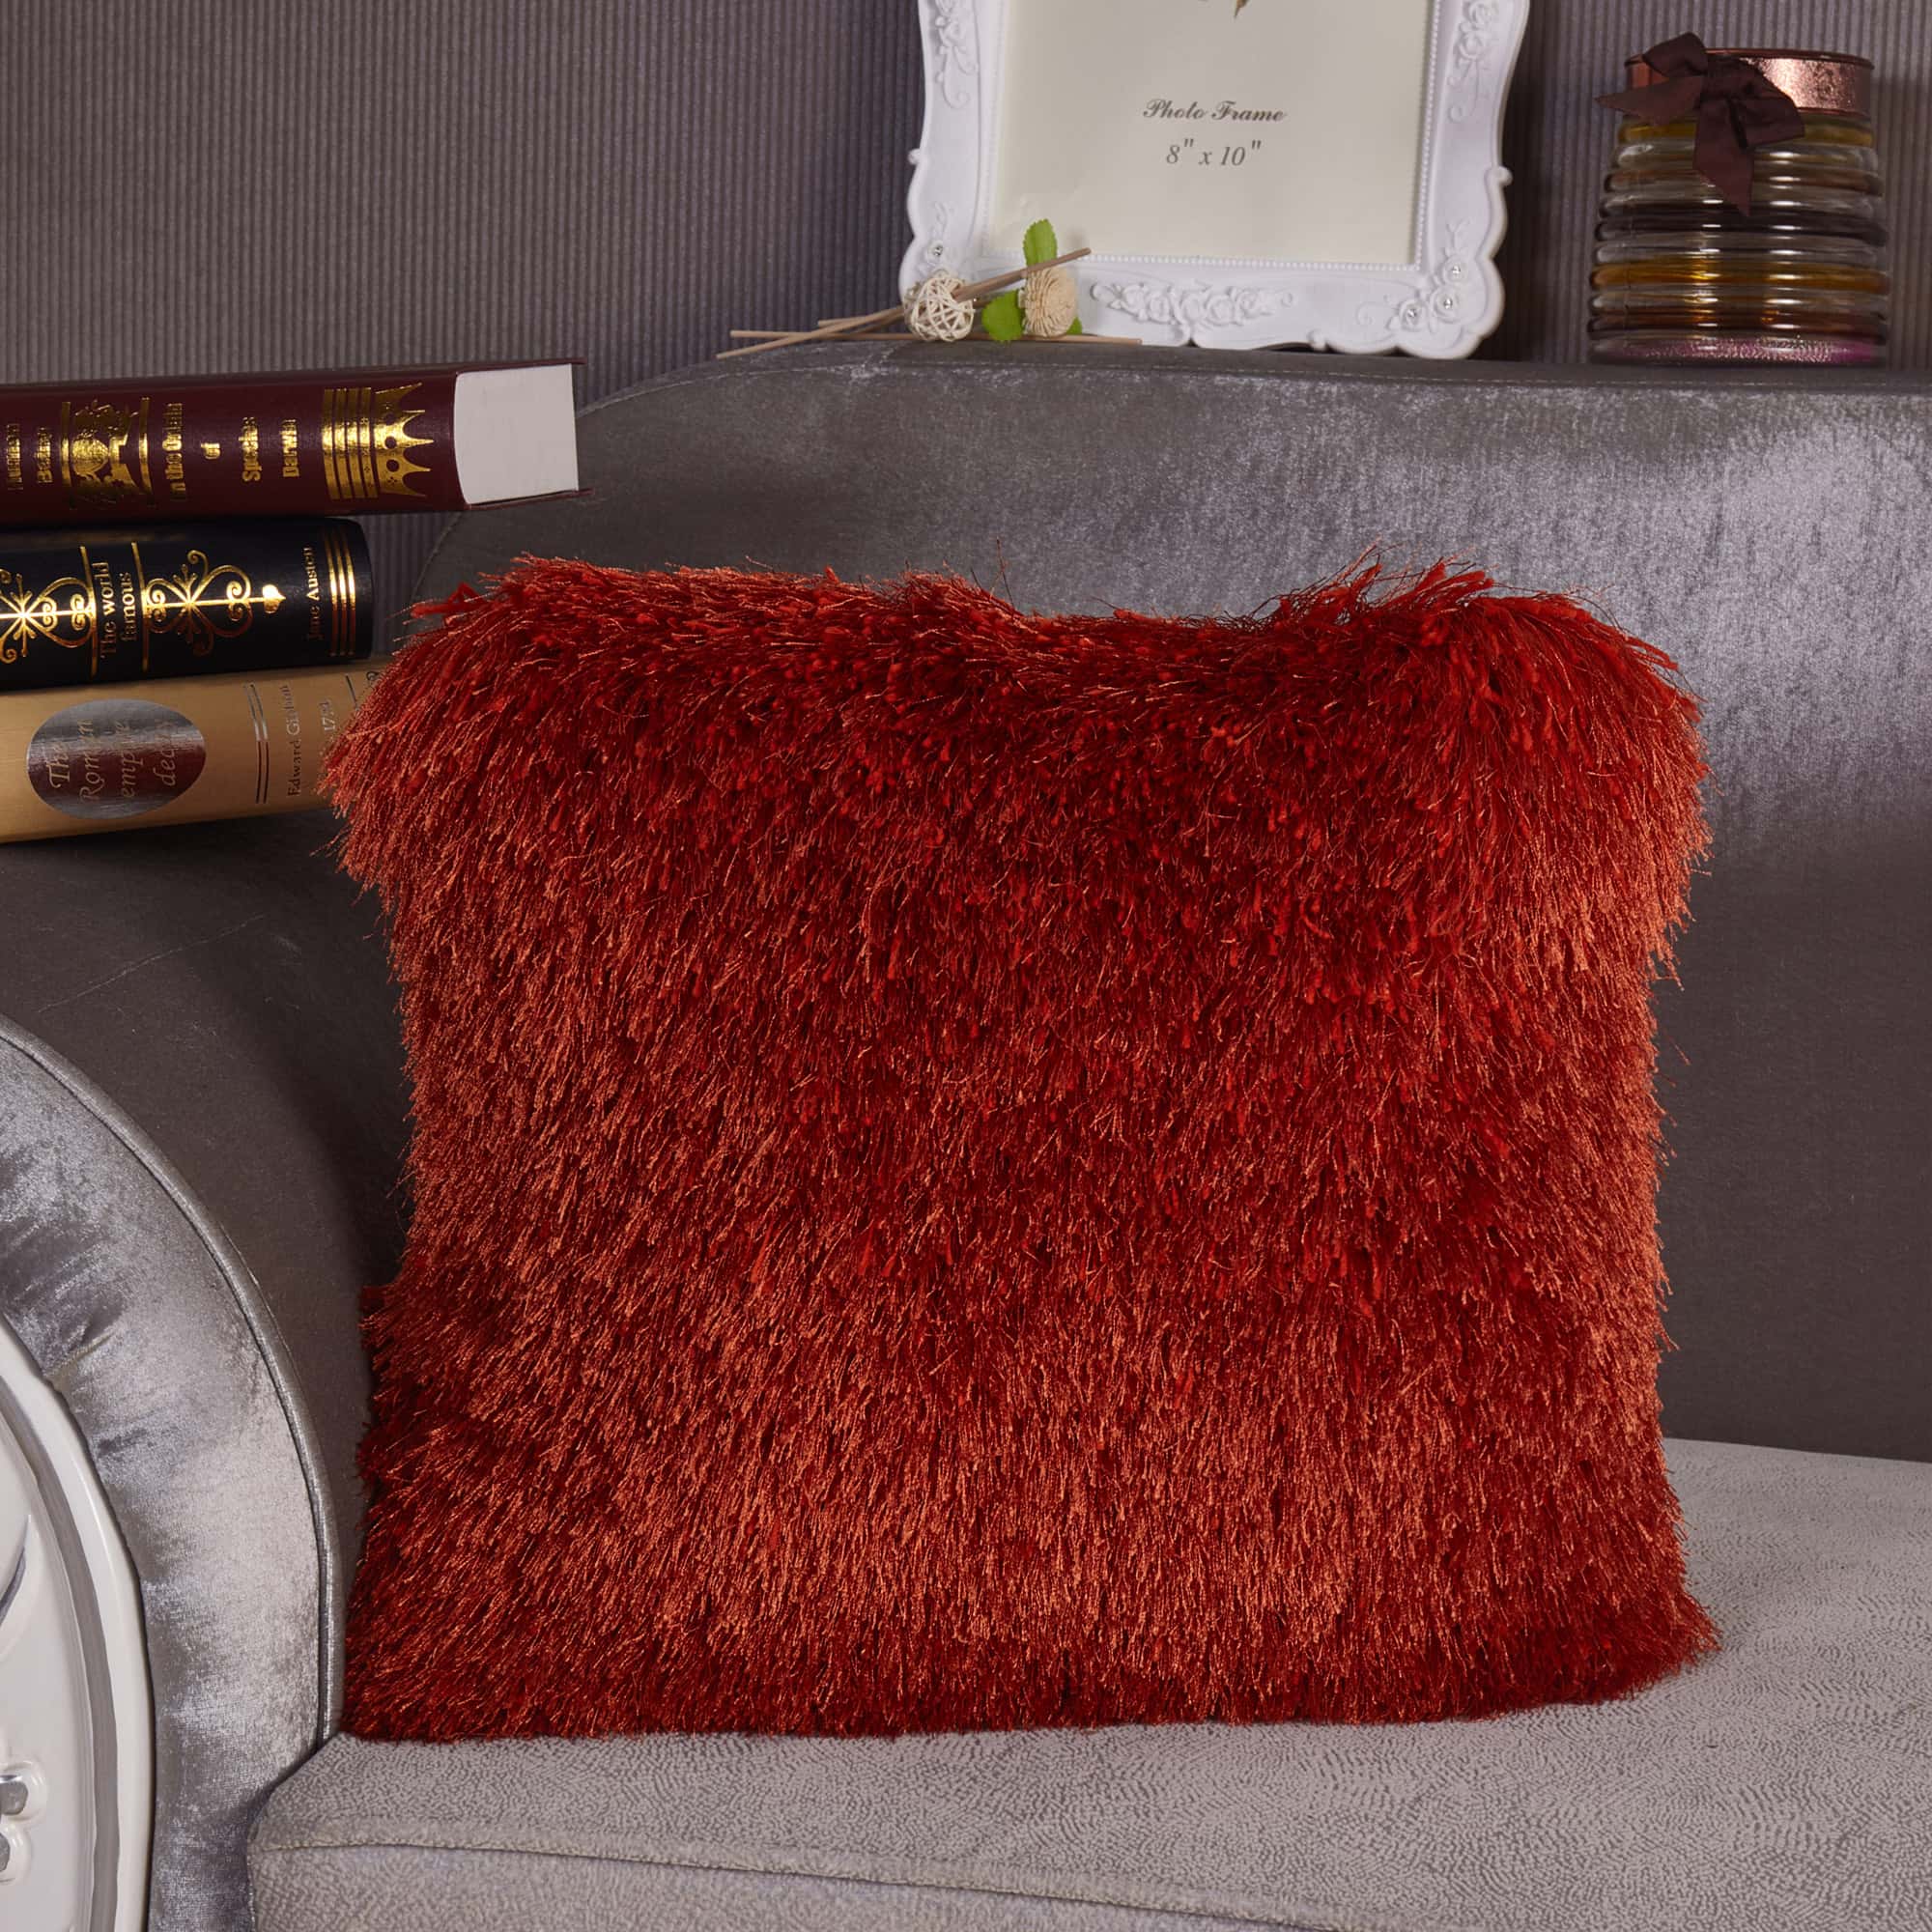 Decorative Shaggy Pillow (18-in x 18-in) - Rust